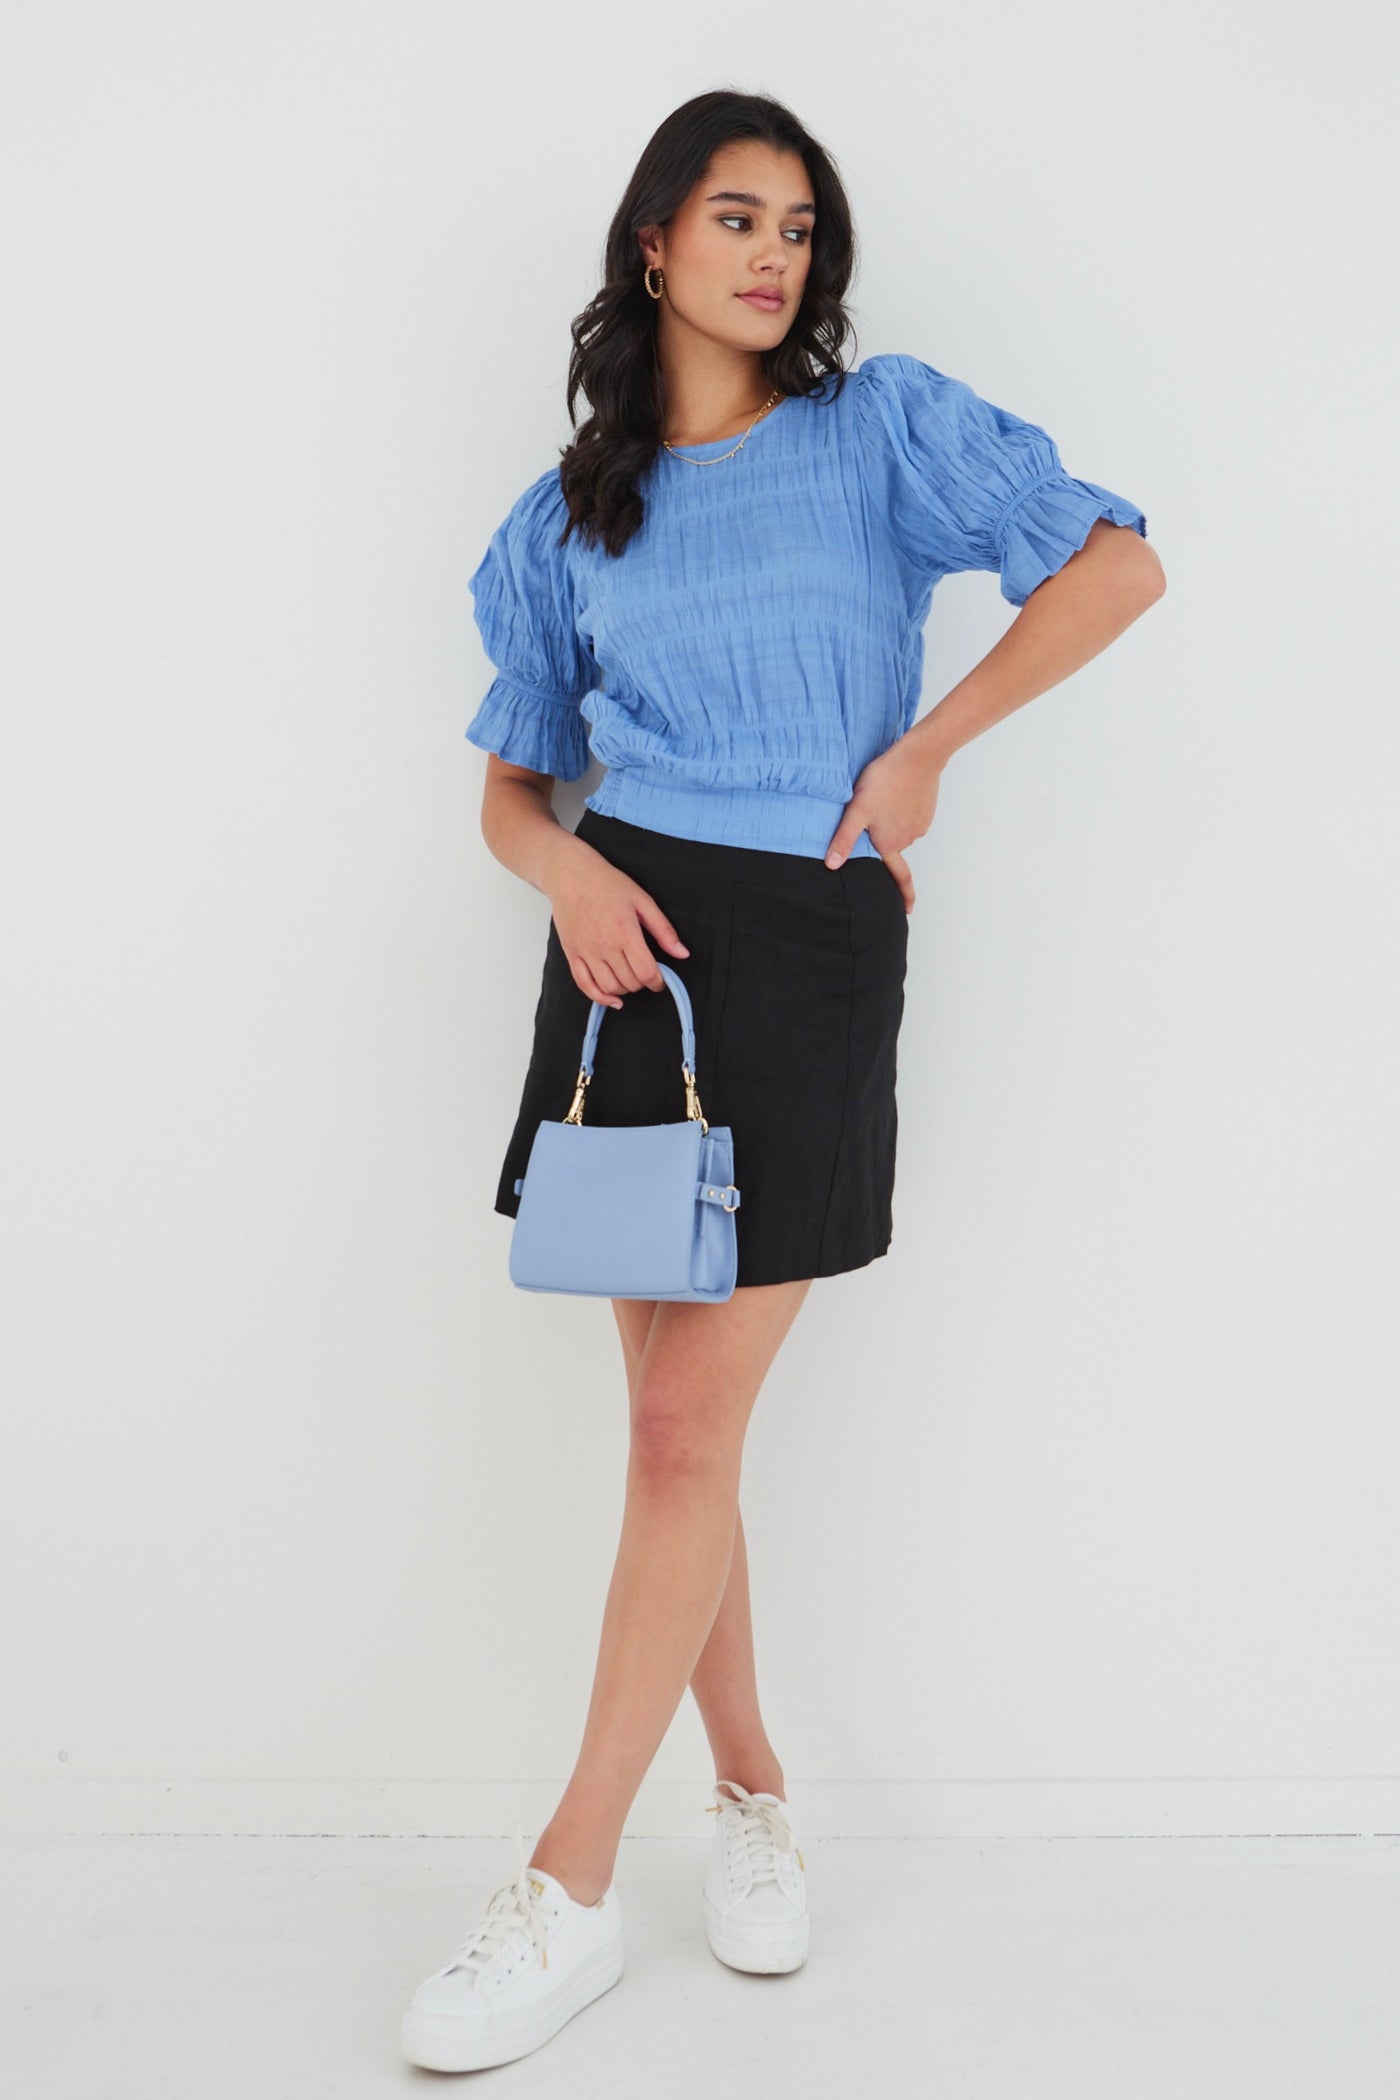 Ivy + Jack Lovely Shirred Top - French Blue